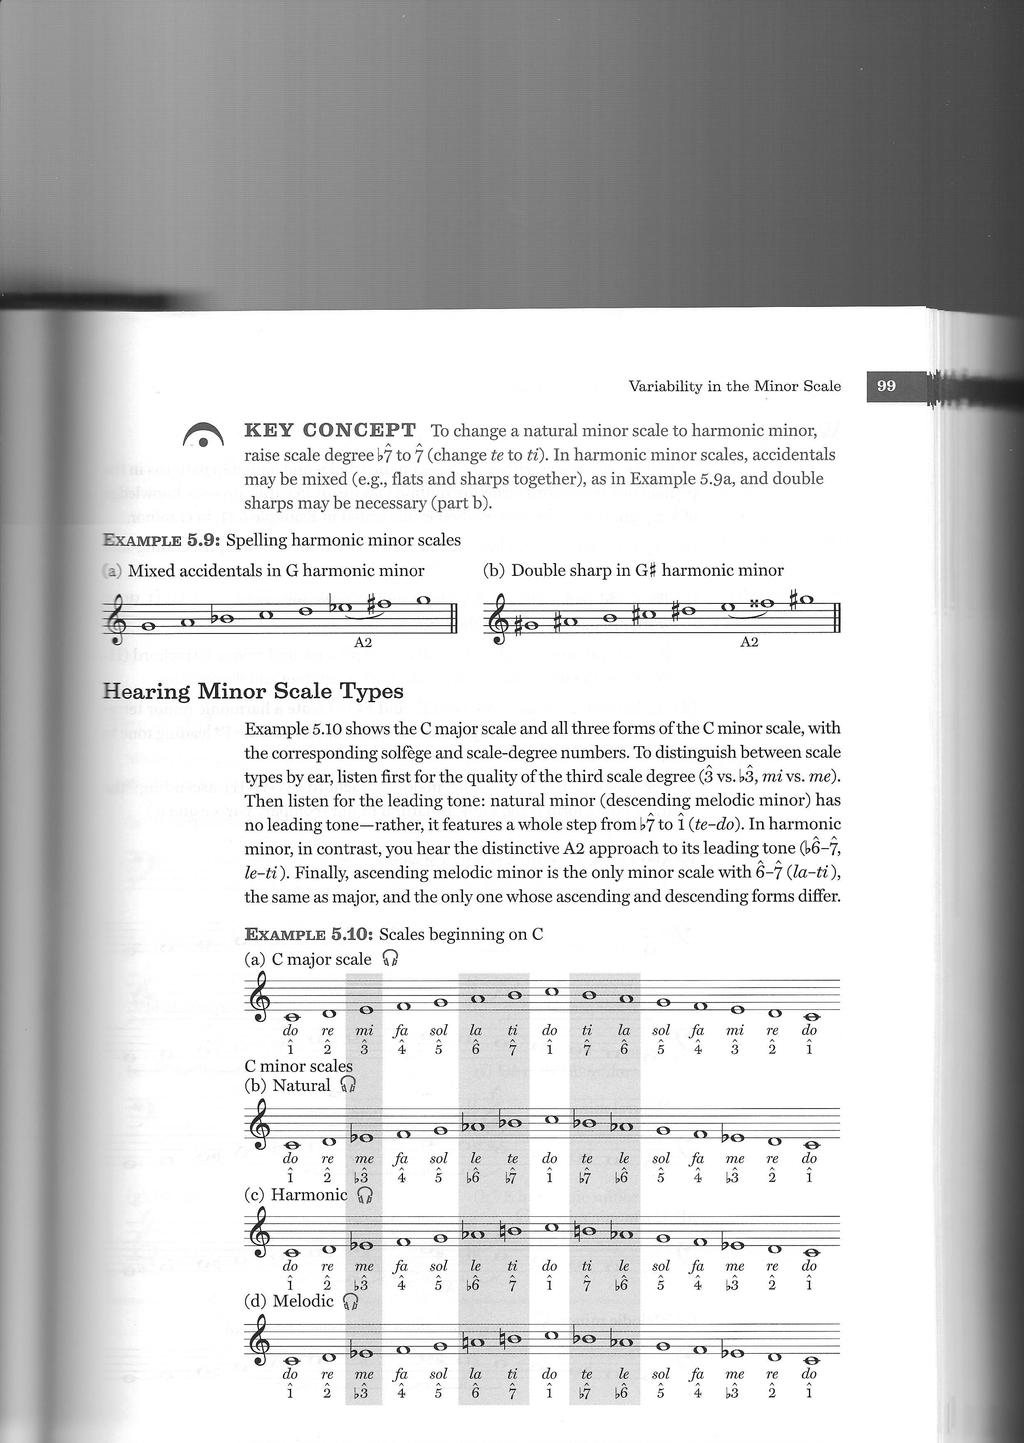 Hearing Minor Scale Types First listen for the b3 to establish if the scale is minor or major. Then listen for the leading tone: natural minor has no leading tone.